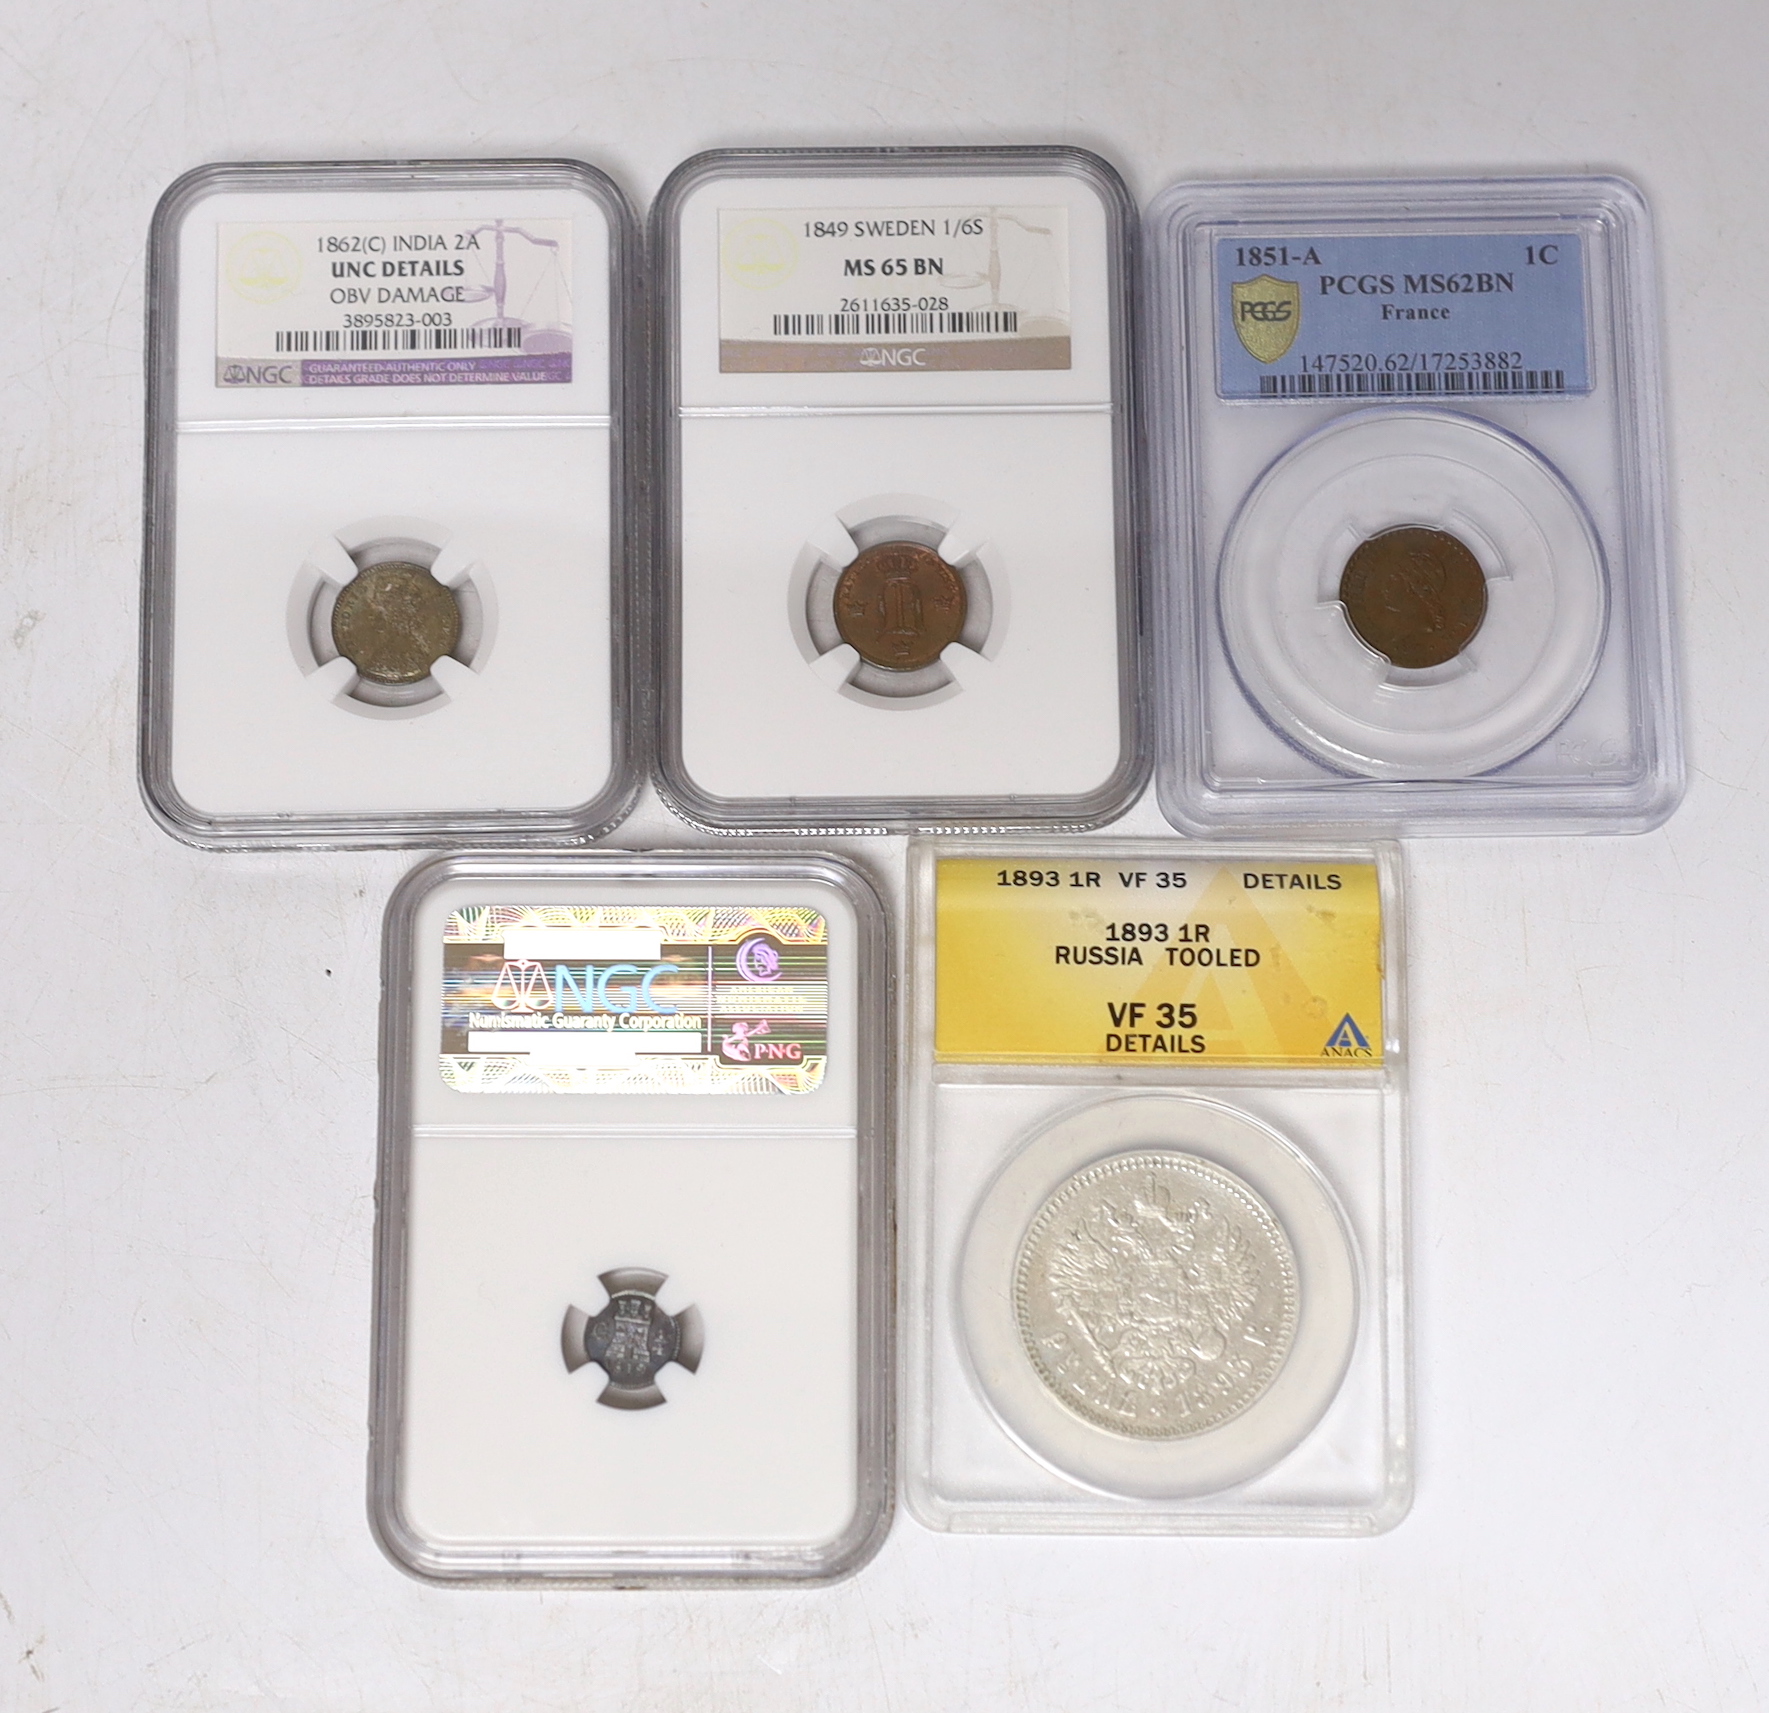 Russia One rouble 1893, ANACS graded VF 35, British India 2 Annas 1862 (C), NGC graded UNC, damage to obverse, Guatemala quarter real, 1819 G, NGC graded MS 65 (the highest graded example by NGC), Sweden 1/6 skilling 184